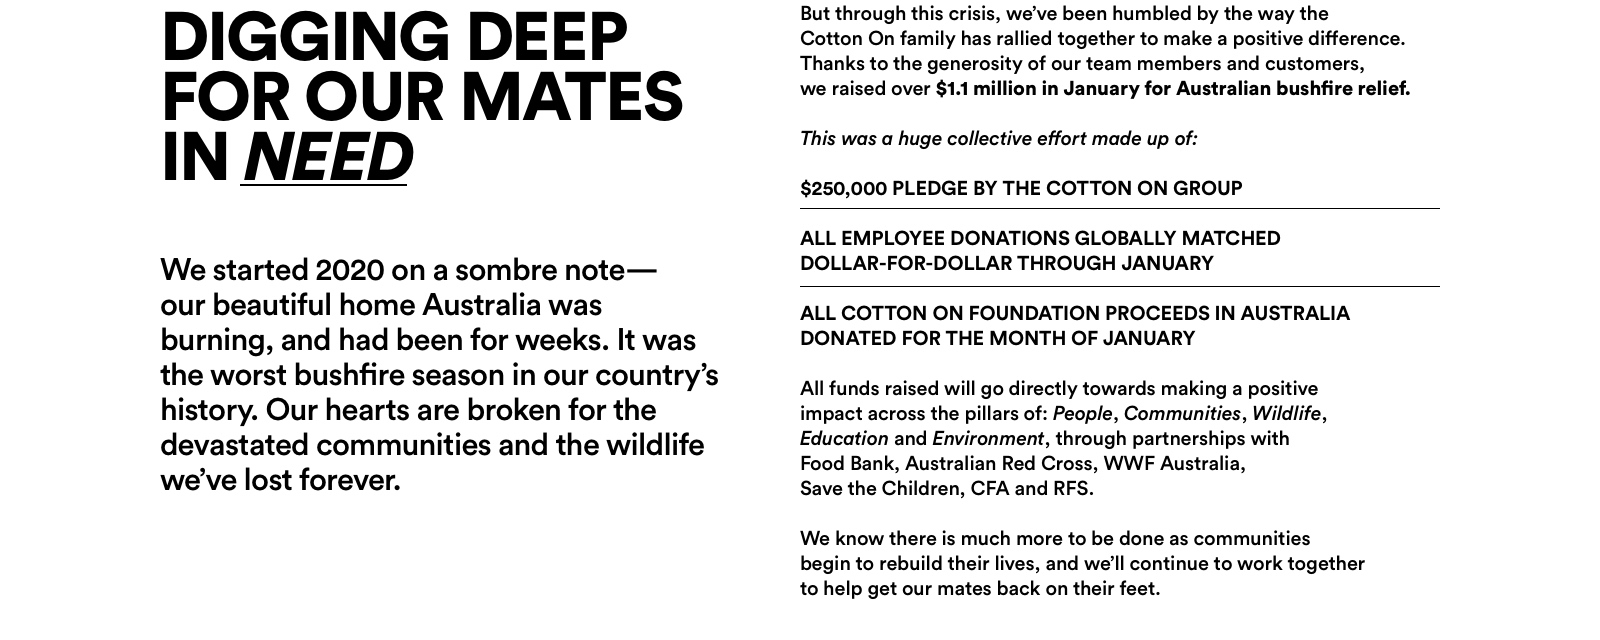 Digging deep for our mates in need. Thanks a million